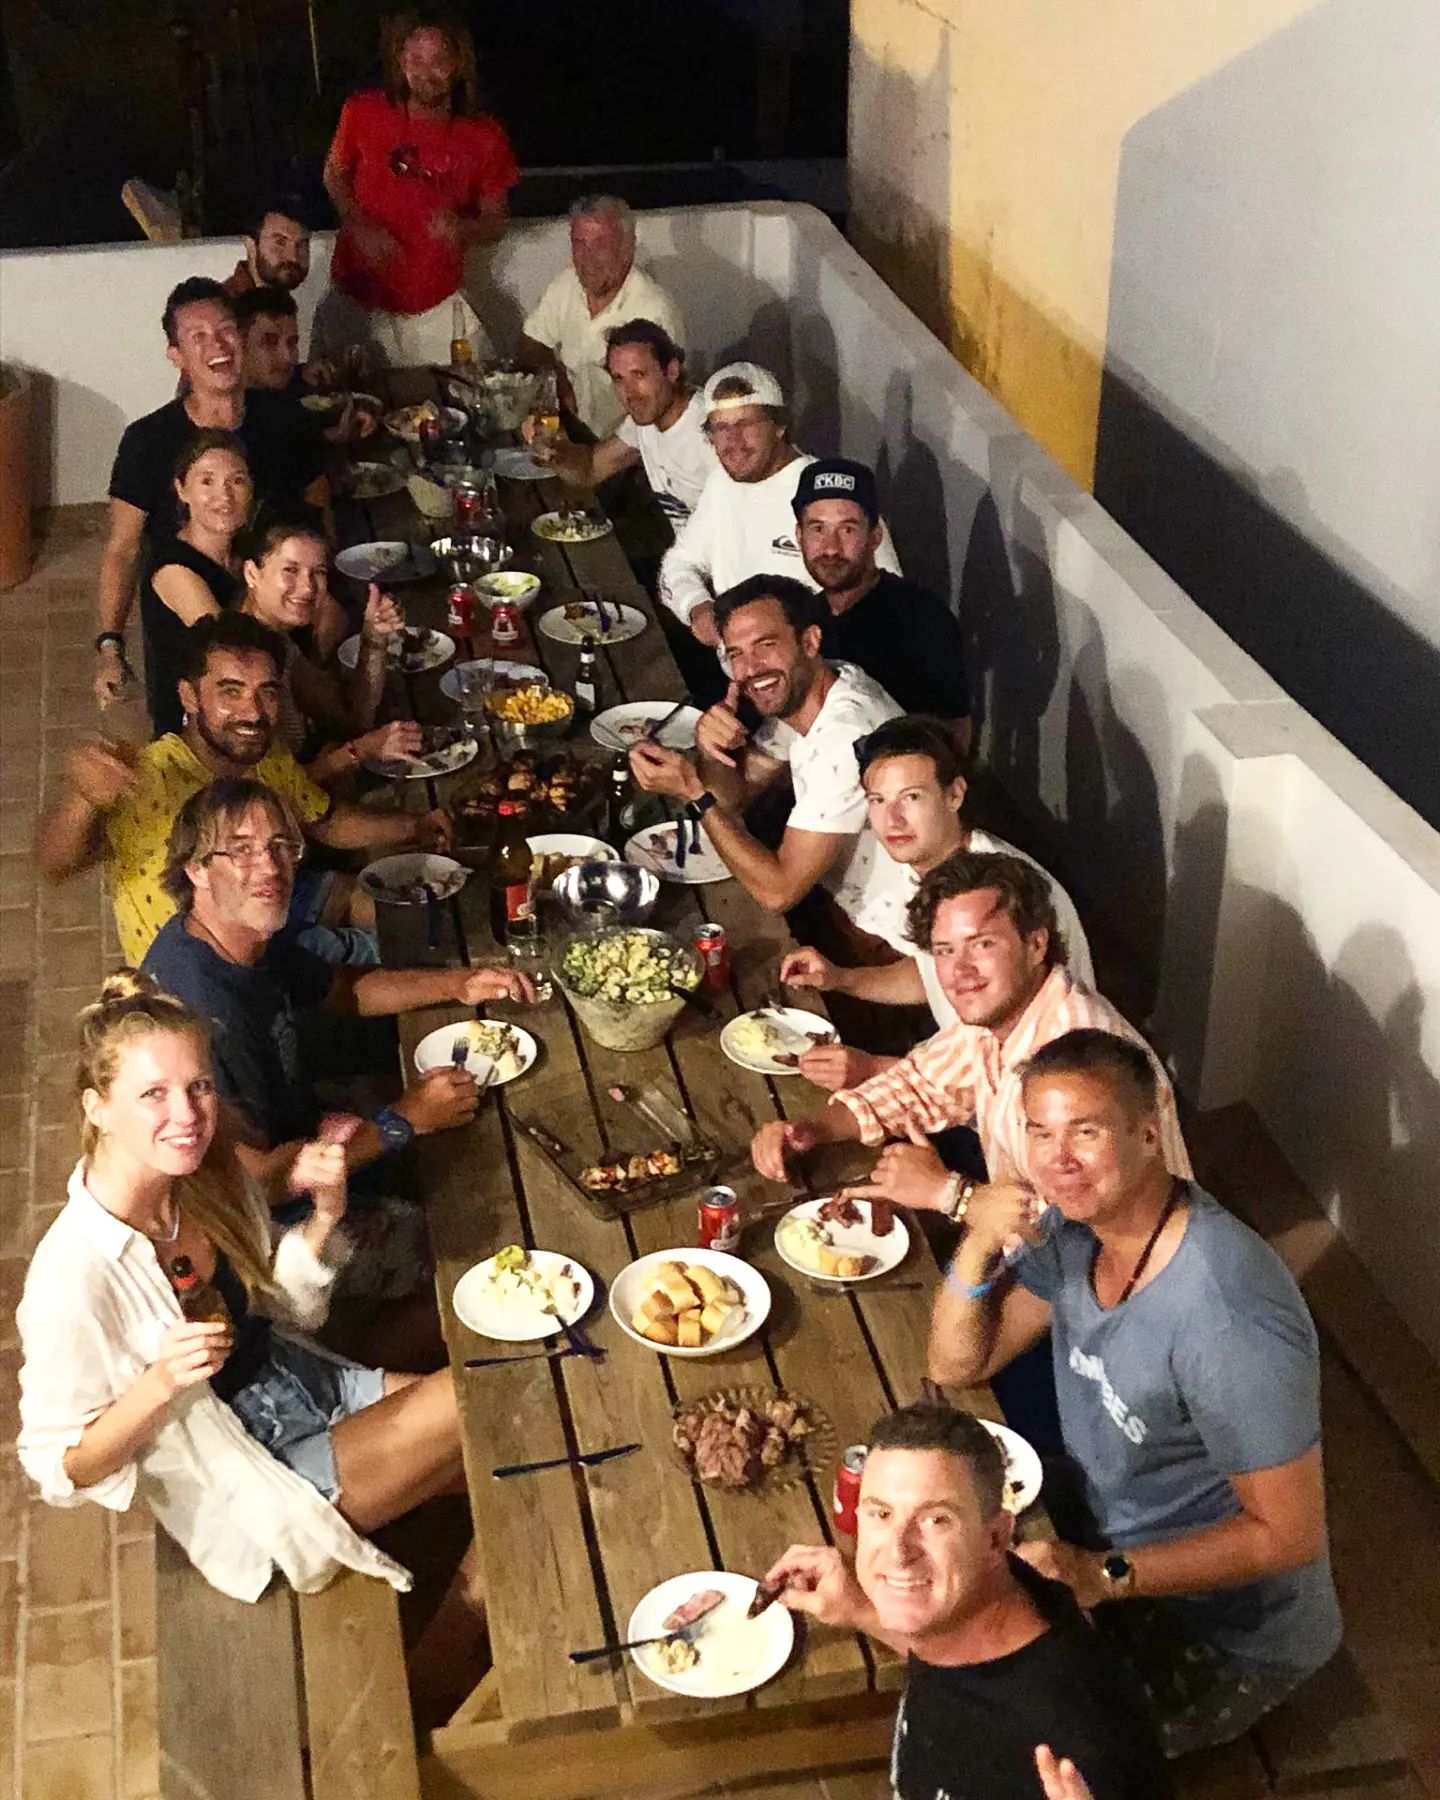 Barbecues night in the toproof of surfers residence Tarifa.
#barbecue #surfing #friends #family #holidays #tarifa #hostels